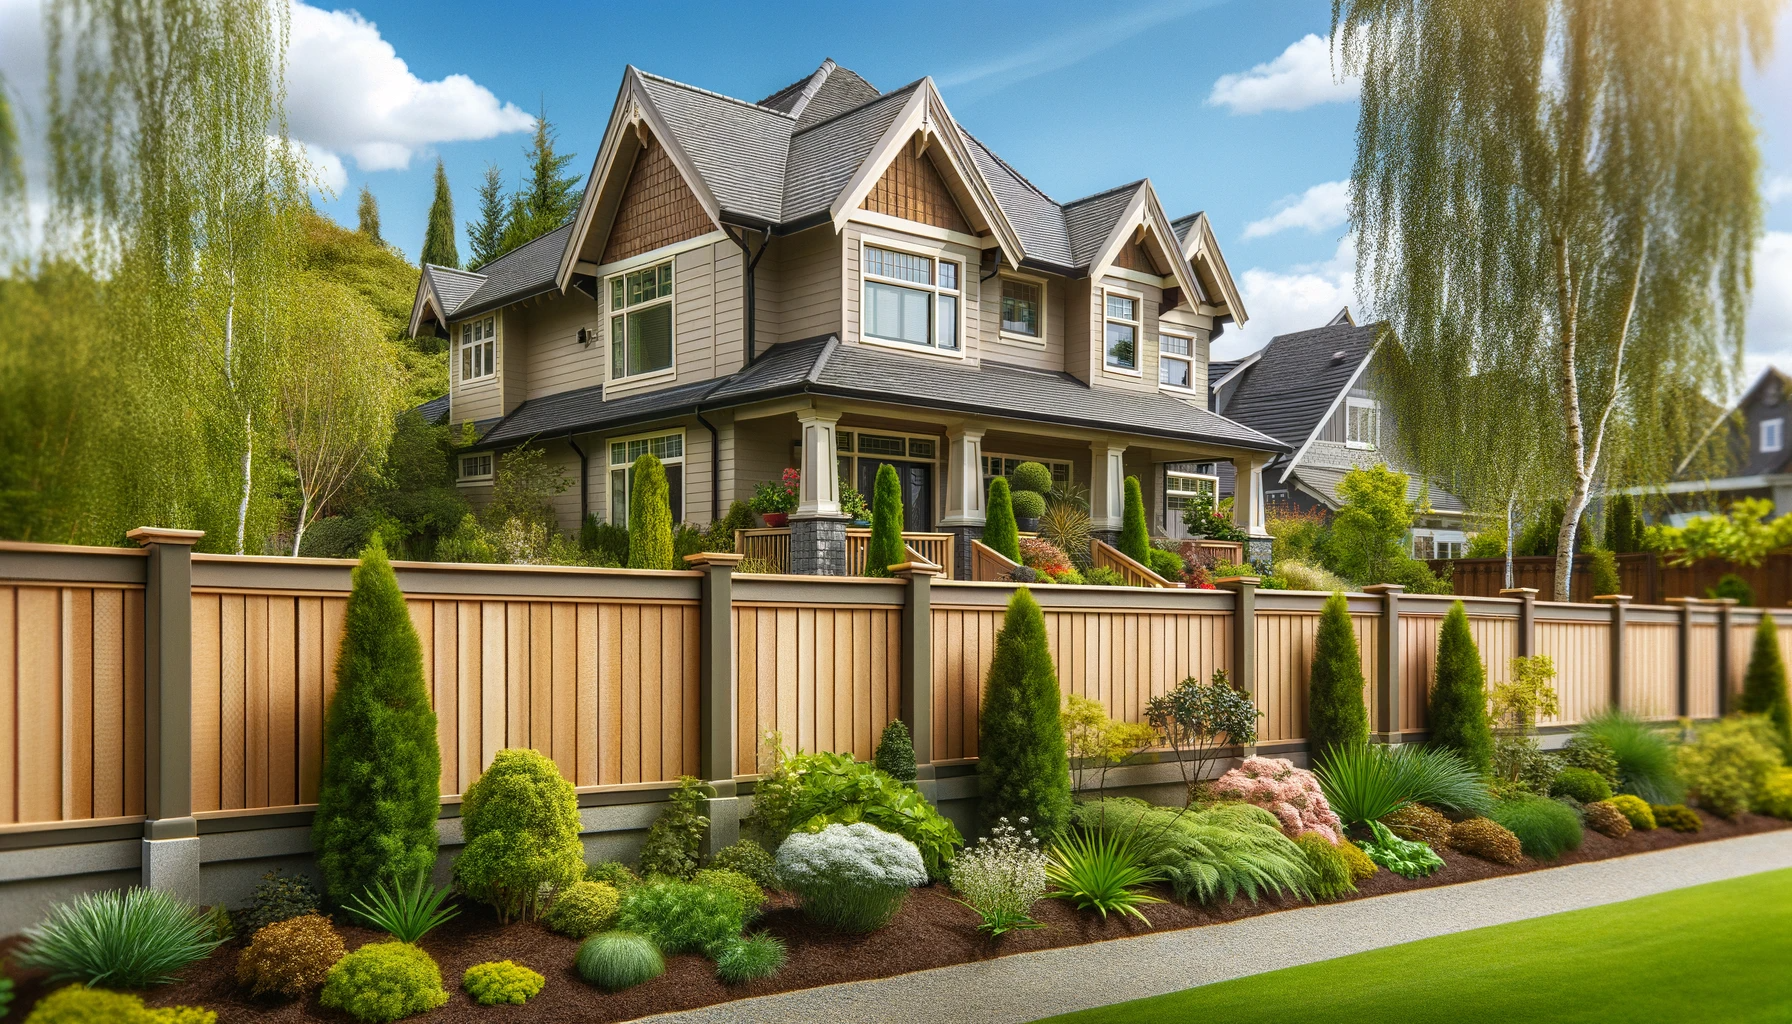 The Ultimate Guide to Choosing the Right Fence for Your Home